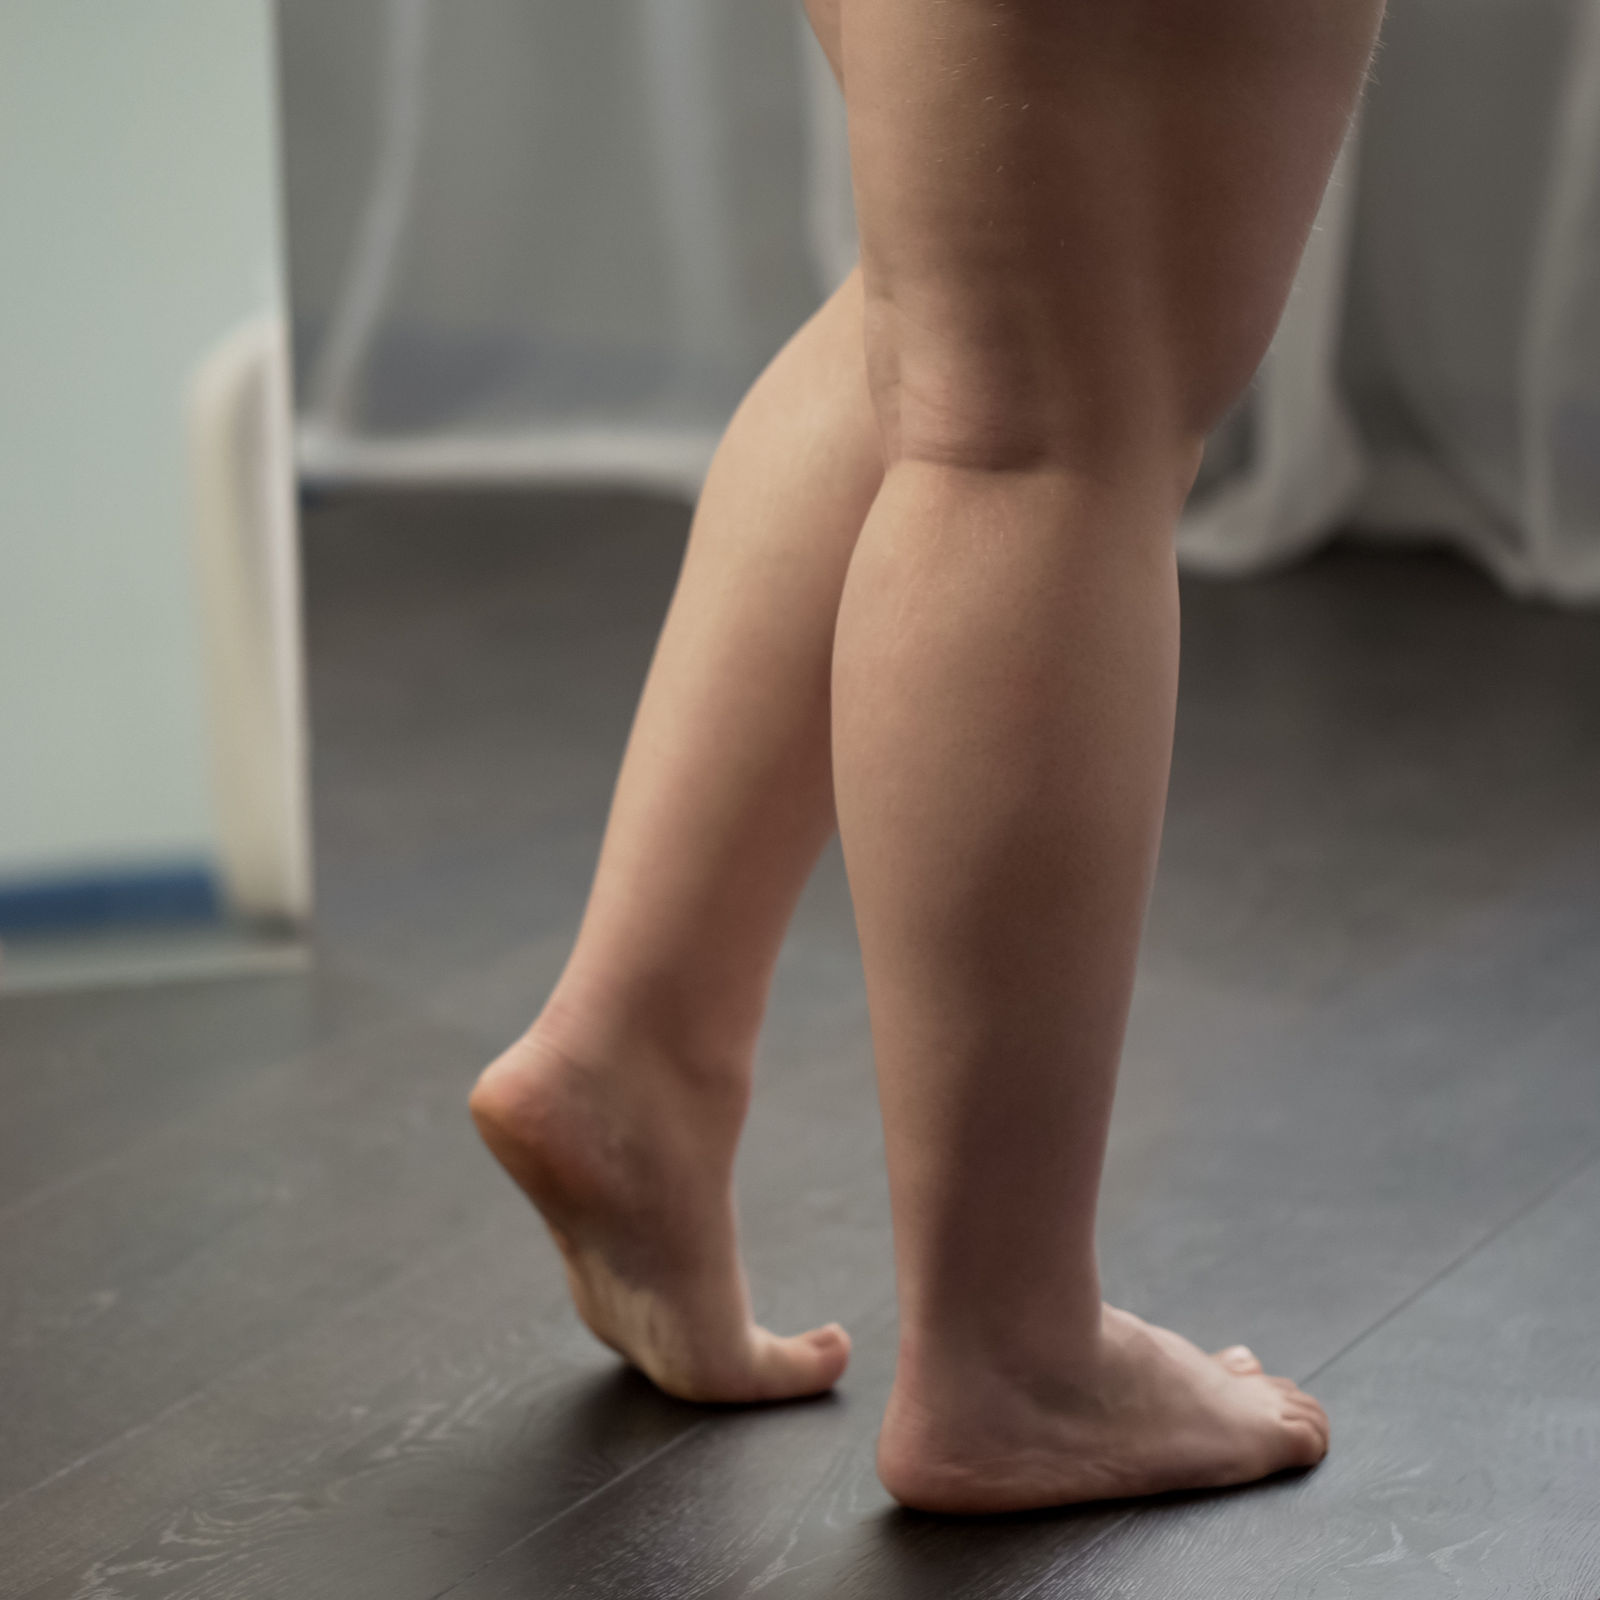 Obese ladys feet, unhealthy woman suffering excess weight and varicose veins